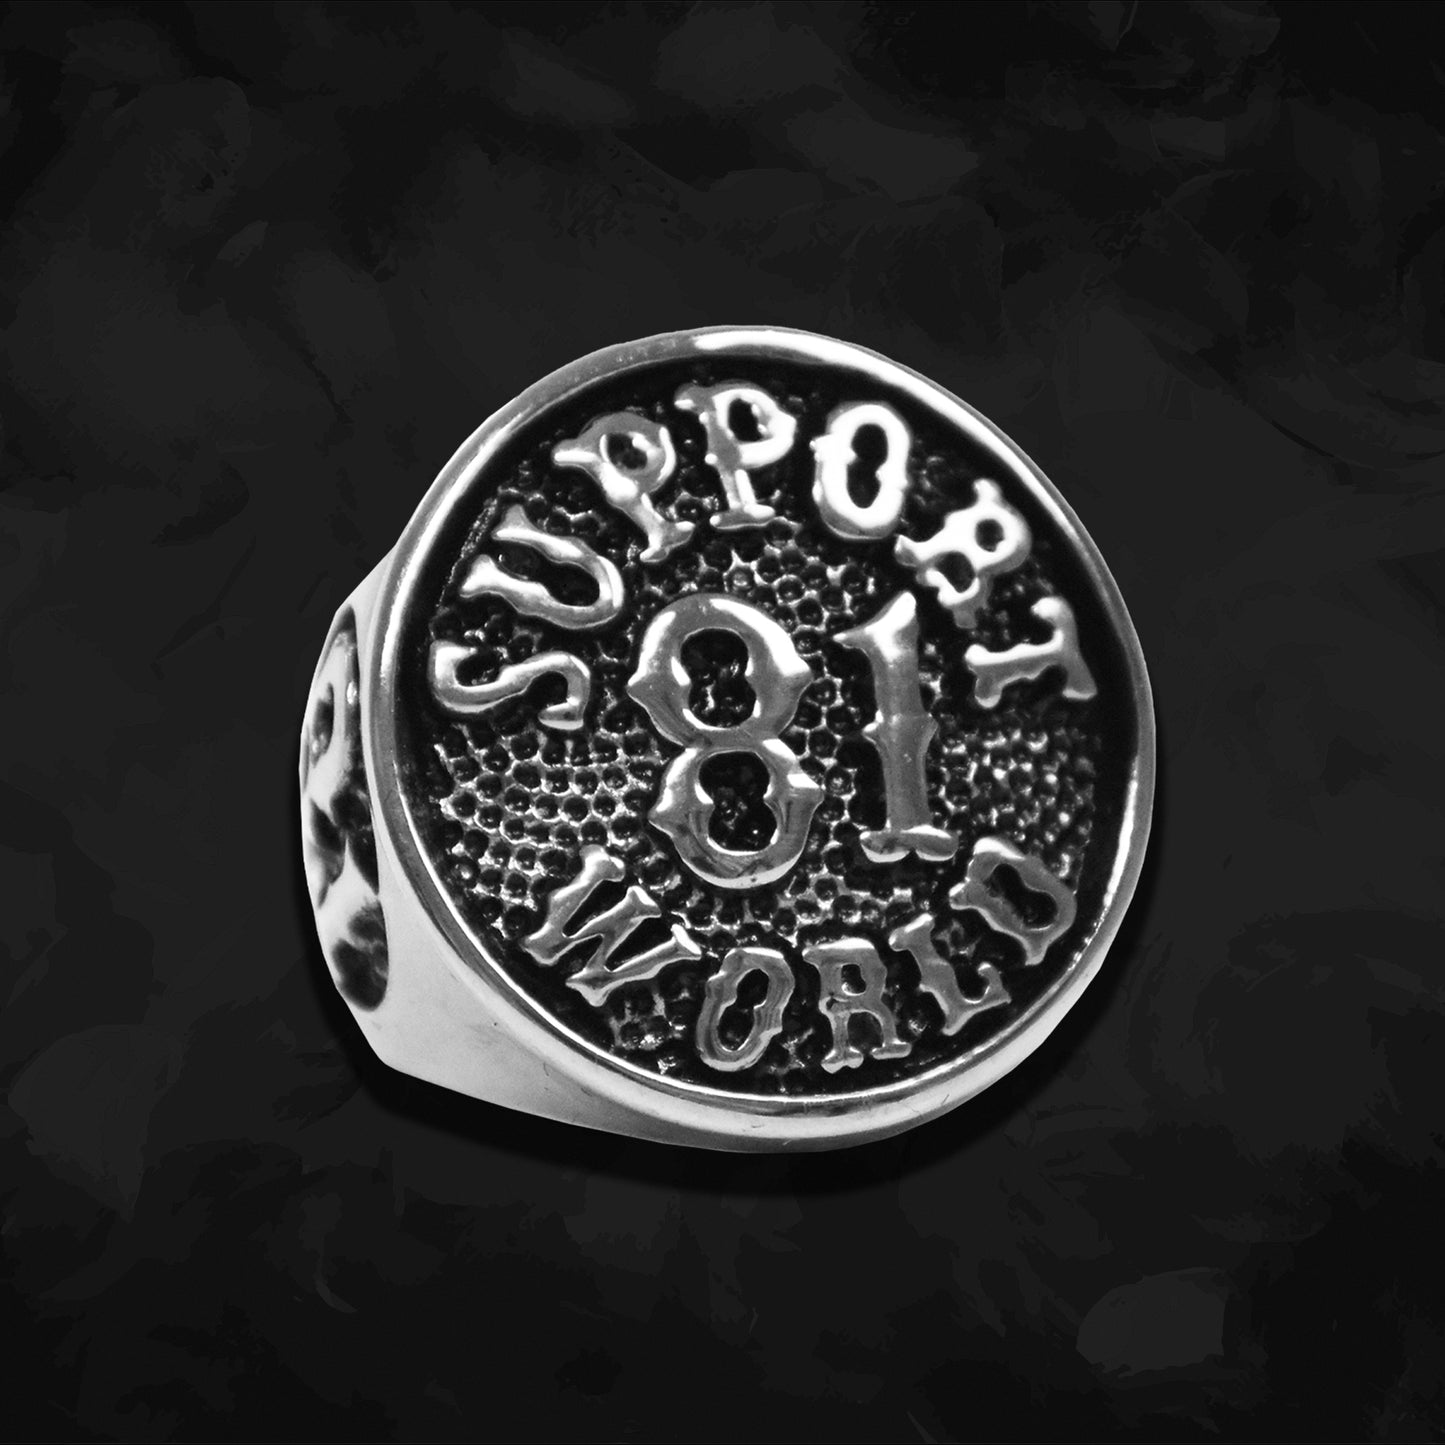 RING "SUPPORT 81 WORLD" - SILBER